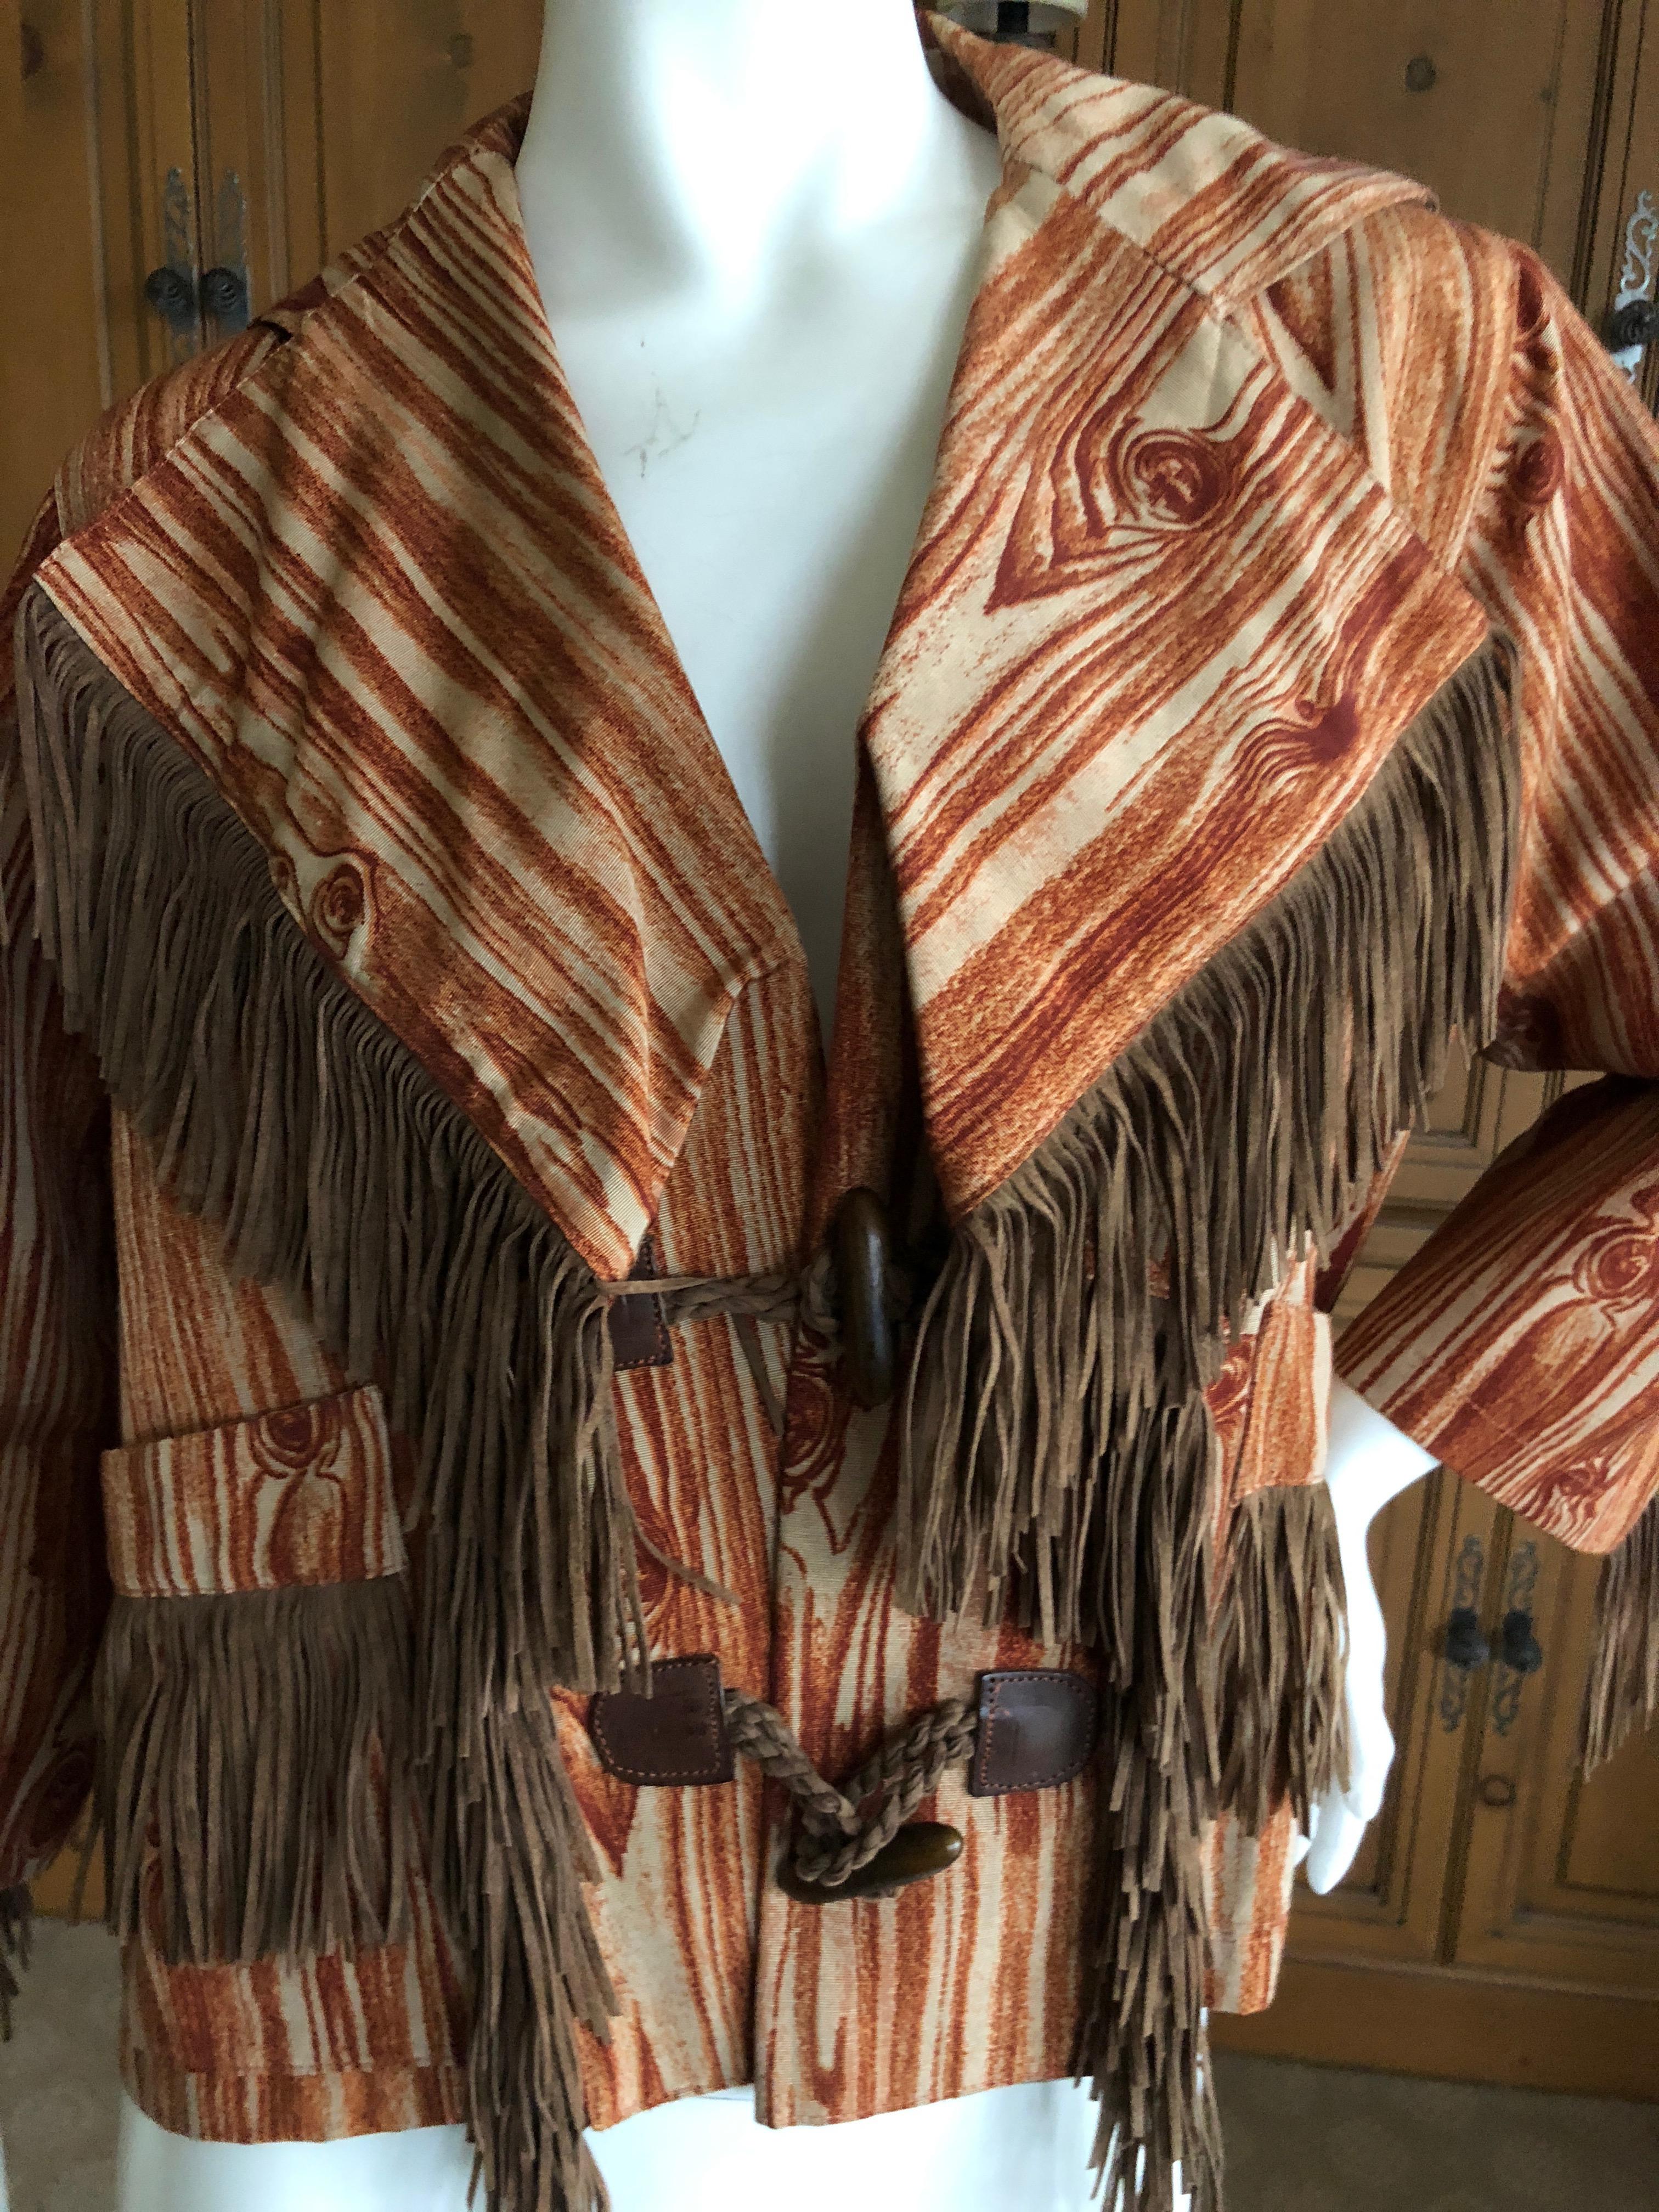 Vivienne Westwood Vintage Unisex Woodgrain Pattern Jacket with Suede Fringe In Excellent Condition For Sale In Cloverdale, CA